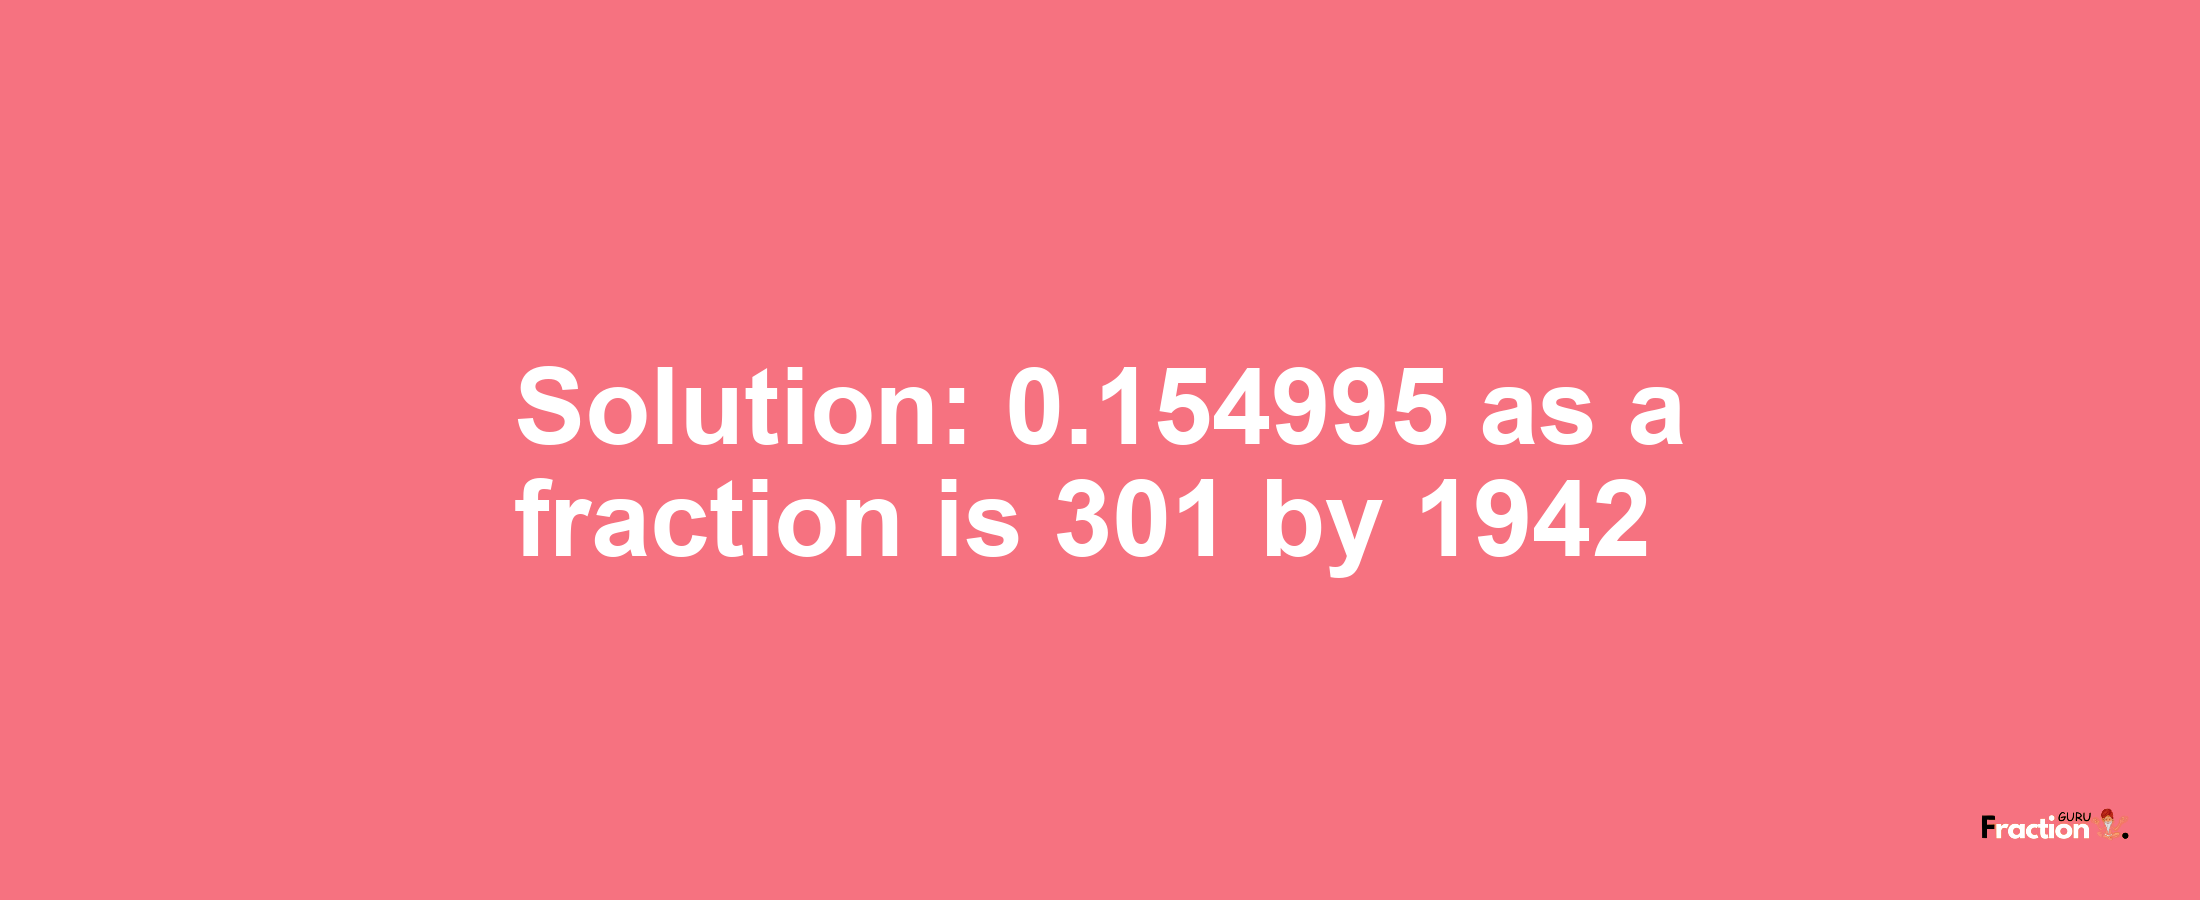 Solution:0.154995 as a fraction is 301/1942